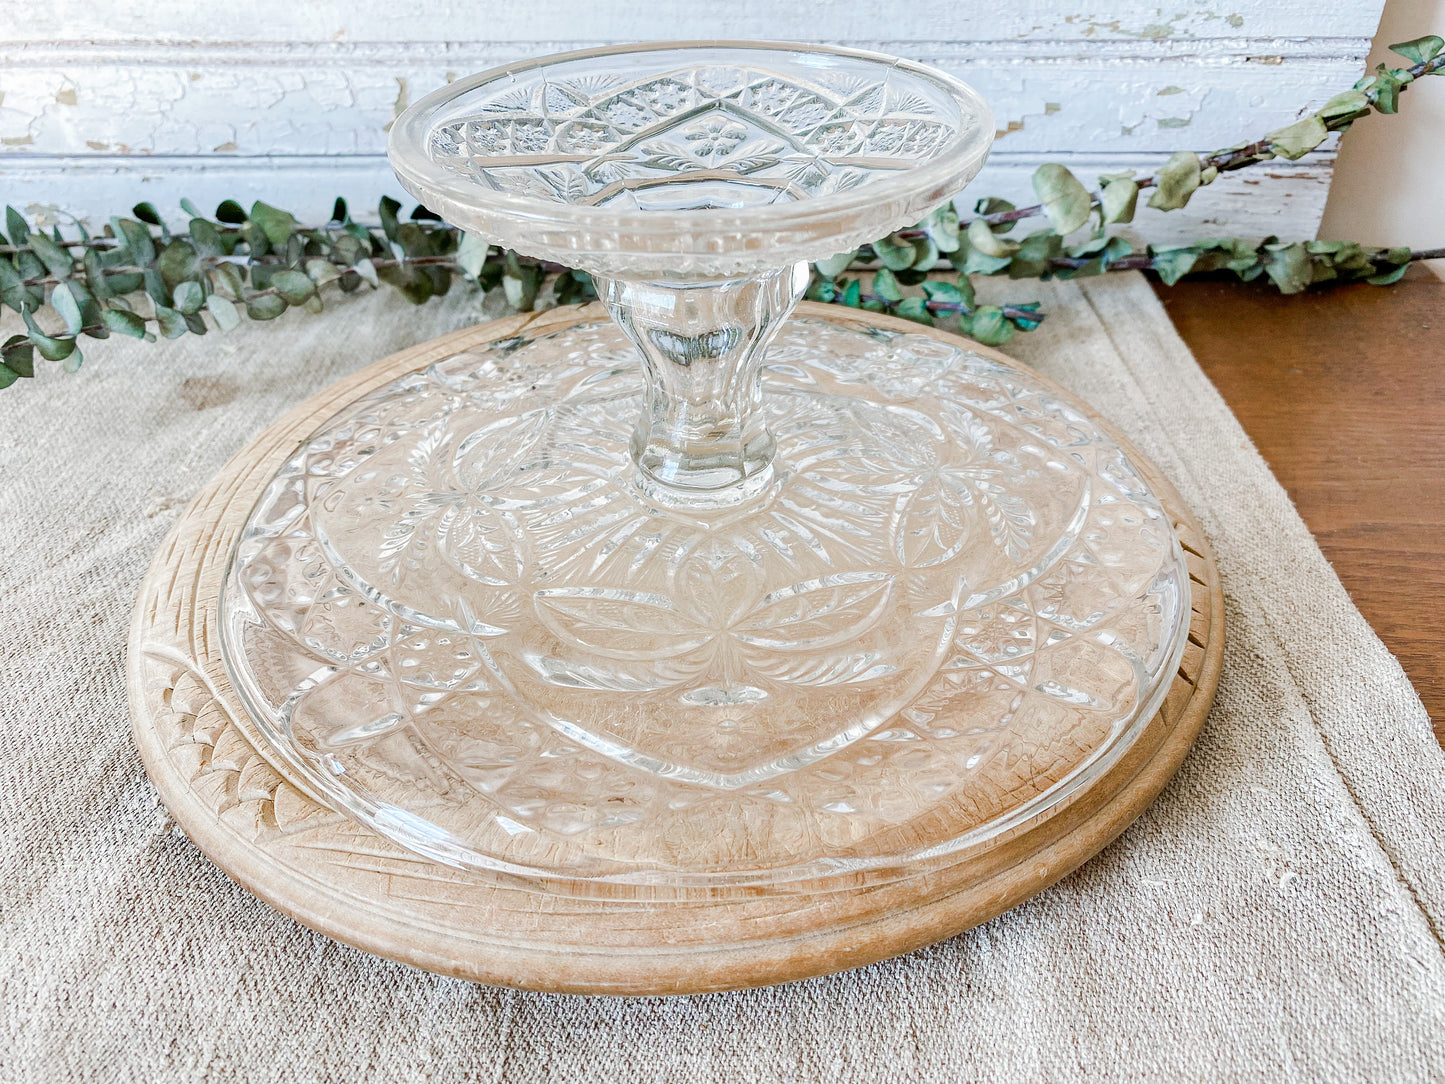 Vintage Pressed Glass Floral Patisserie Stand, Small 9" Cake Stand